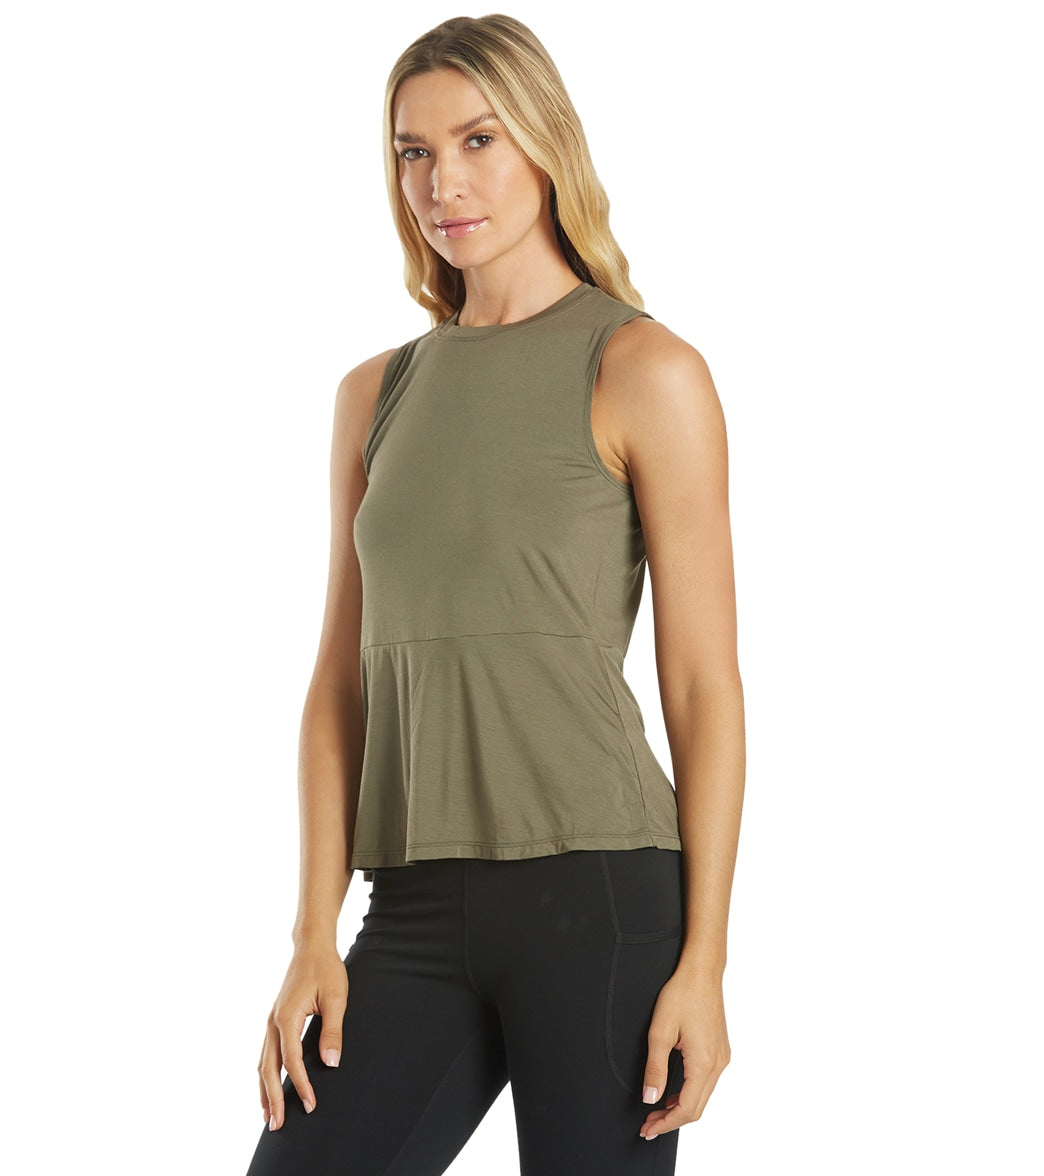 Everyday Yoga Radiant Strappy Back Support Tank at YogaOutlet.com